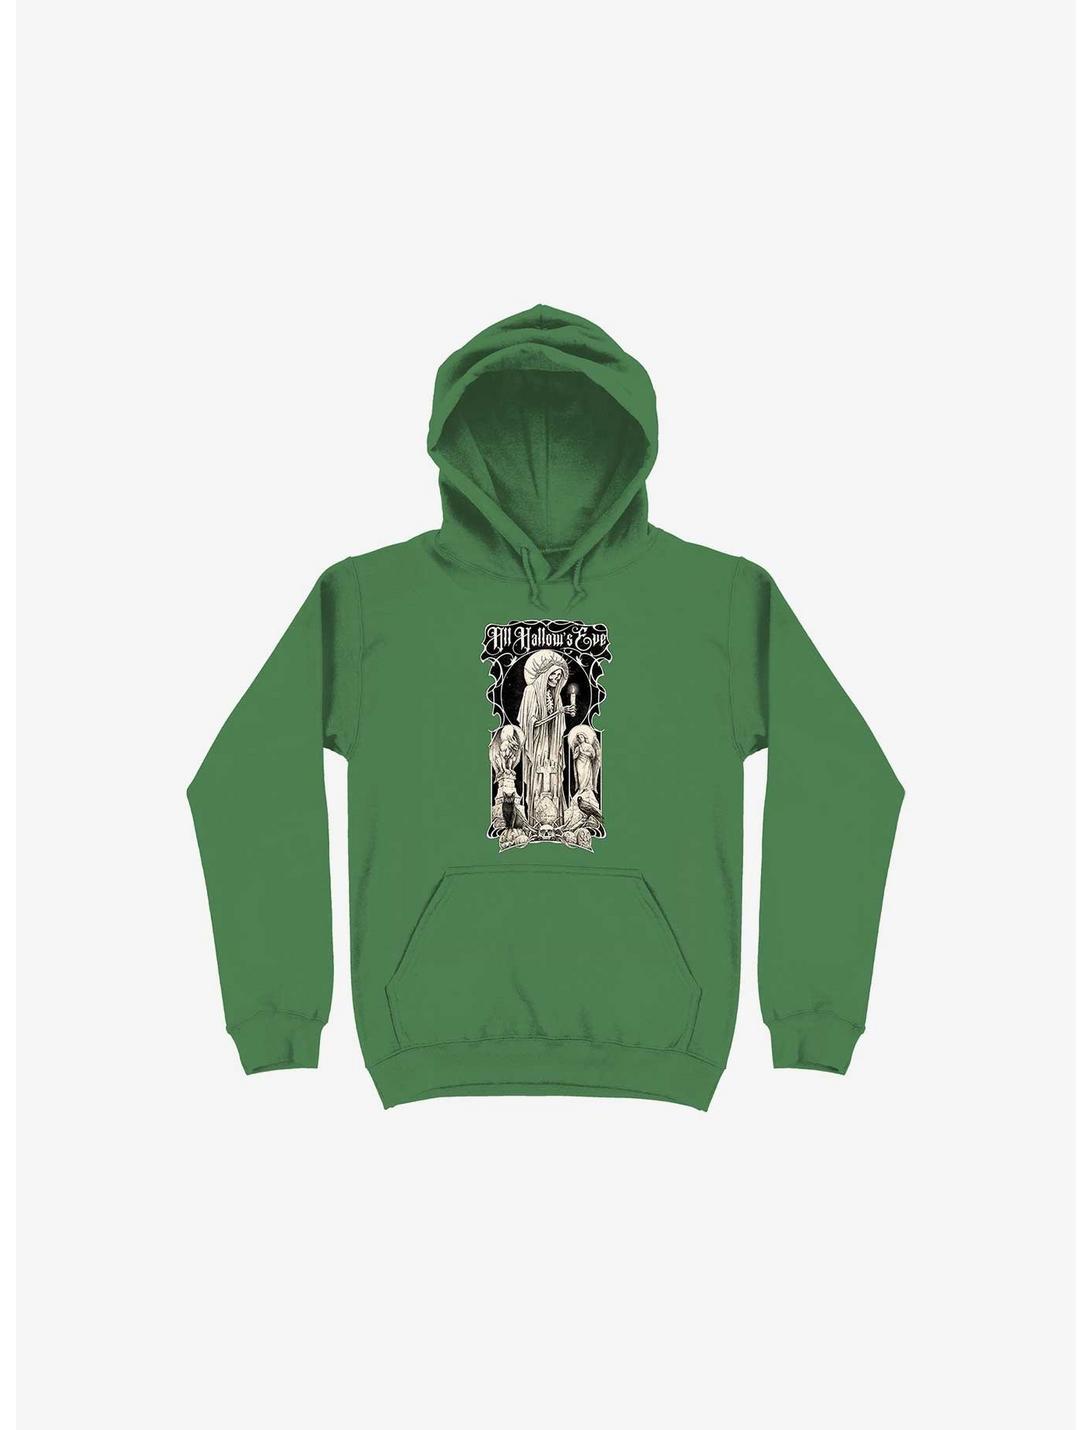 All Hallow's Eve Kelly Green Hoodie, KELLY GREEN, hi-res